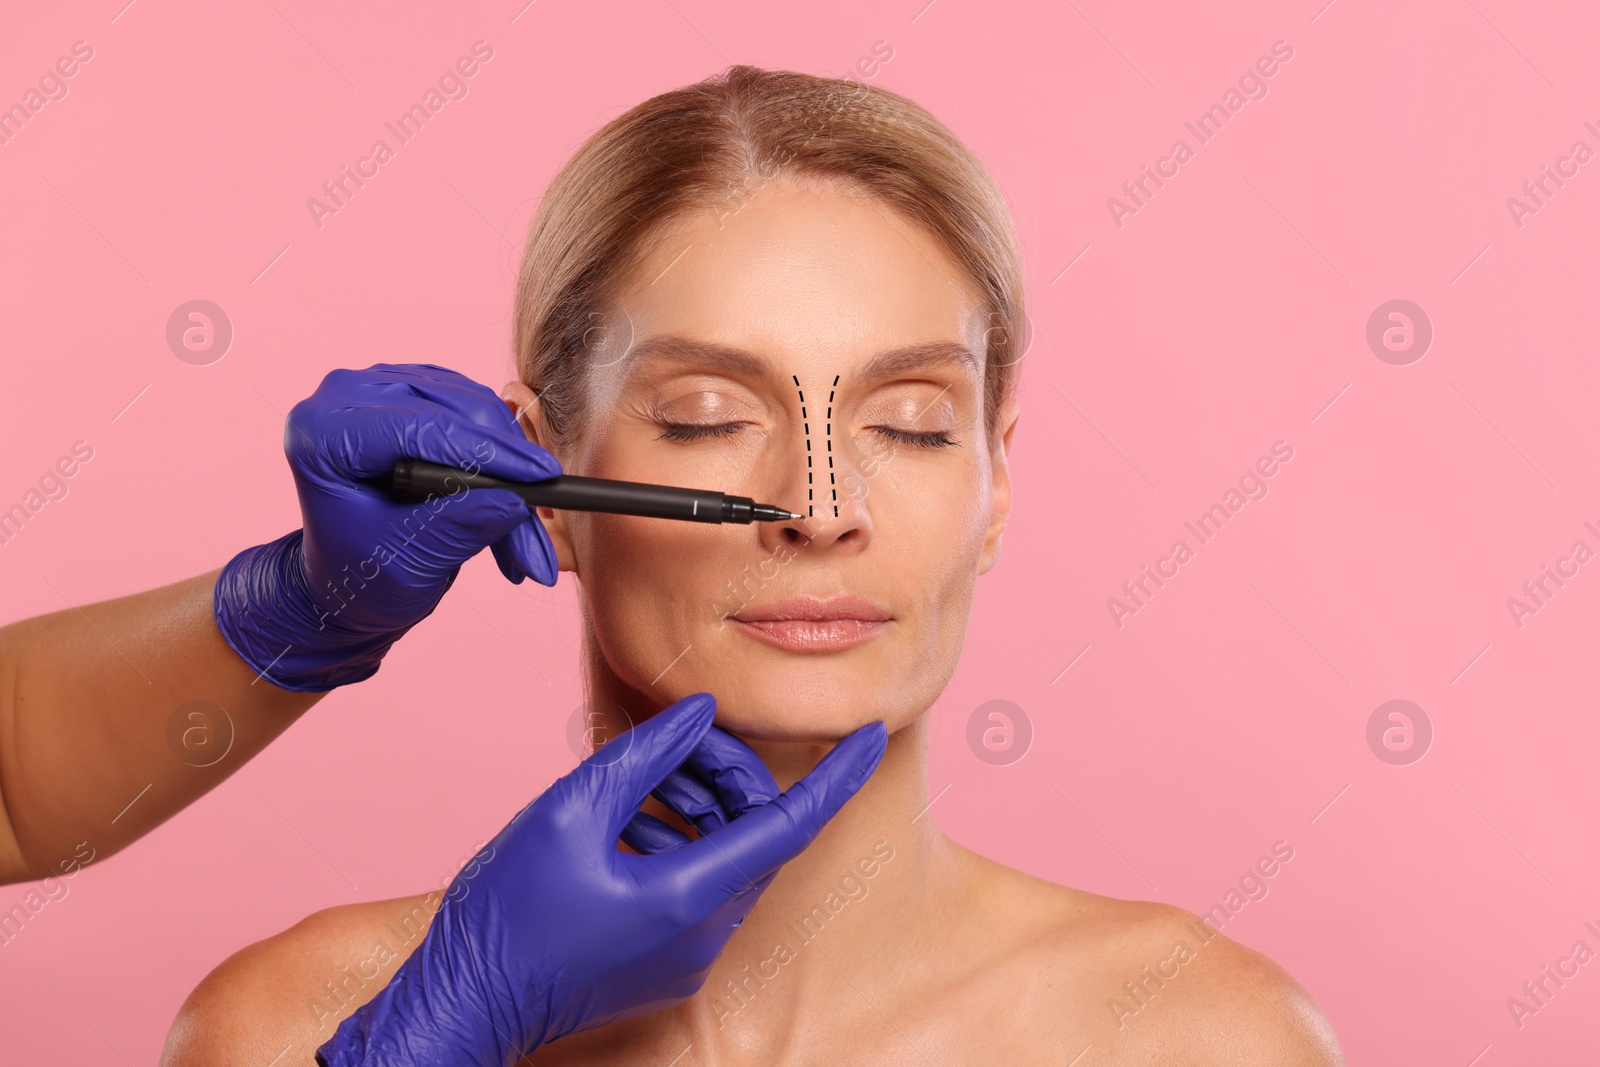 Image of Woman preparing for cosmetic surgery, pink background. Doctor drawing markings on her face, closeup